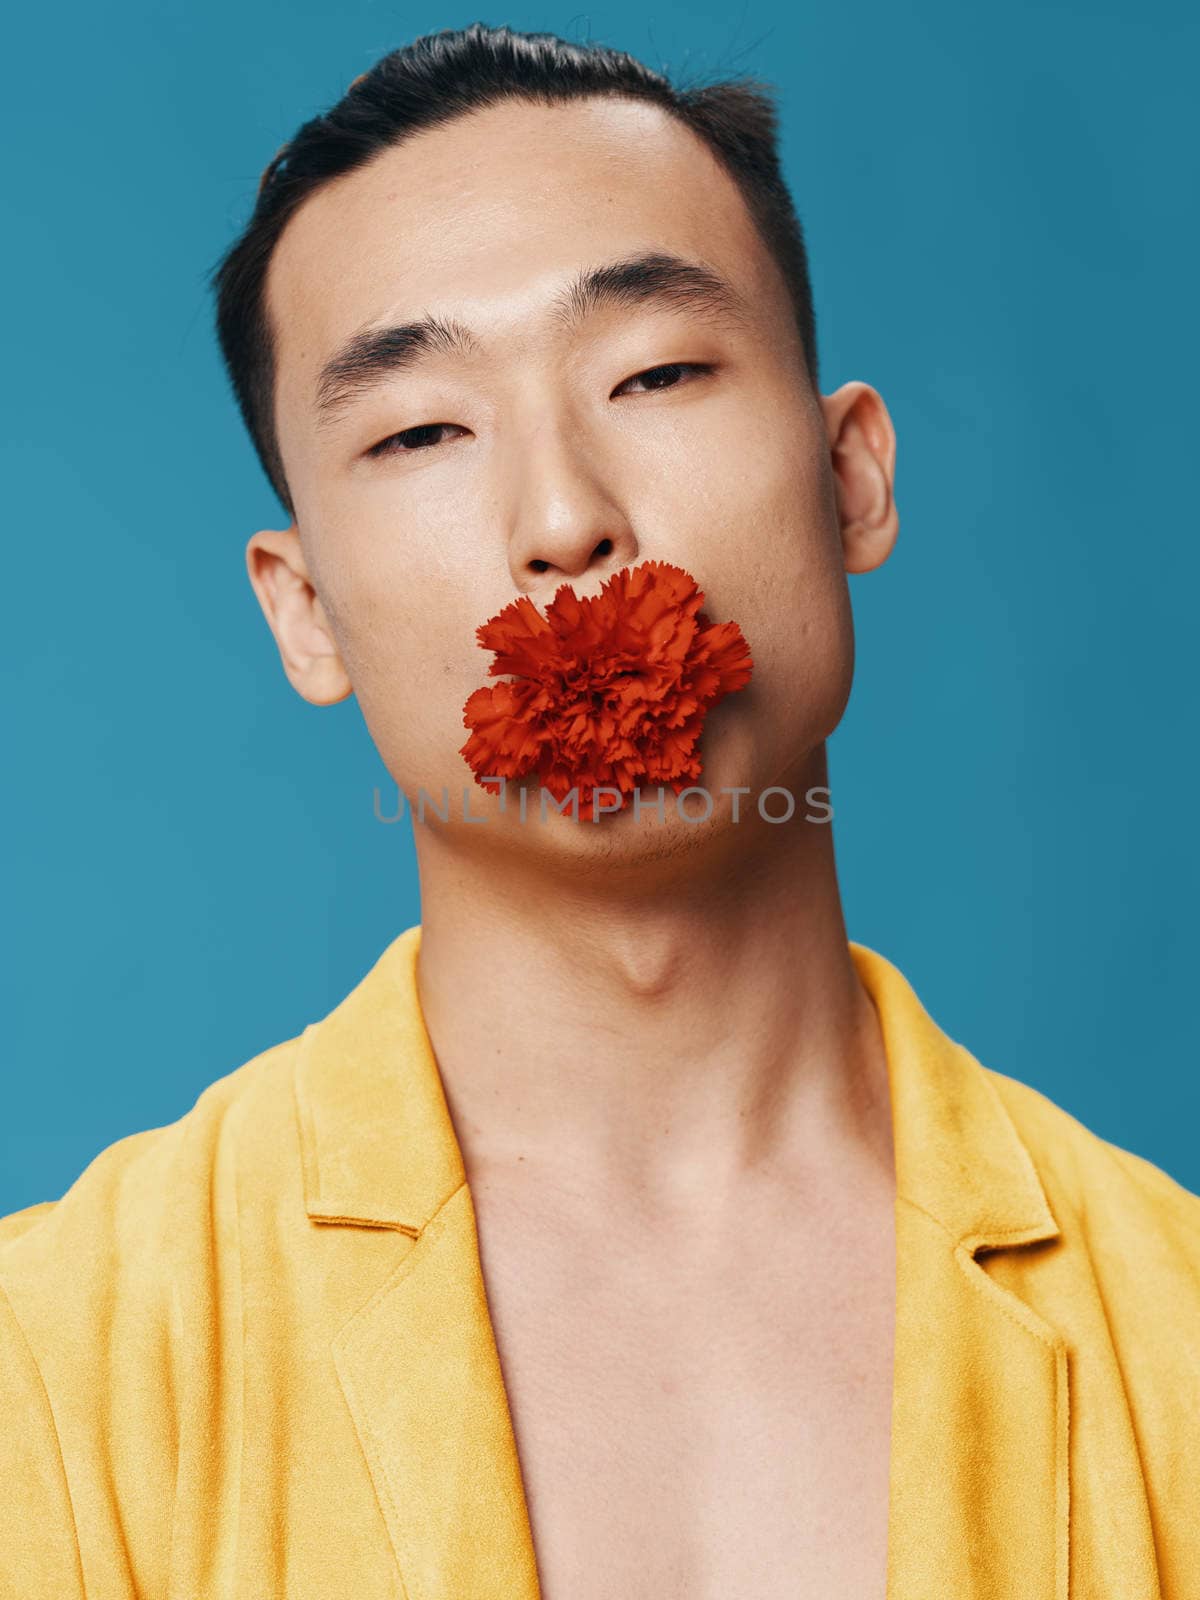 A man in a yellow coat with a red flower in his mouth on a blue background Asian appearance portrait. High quality photo